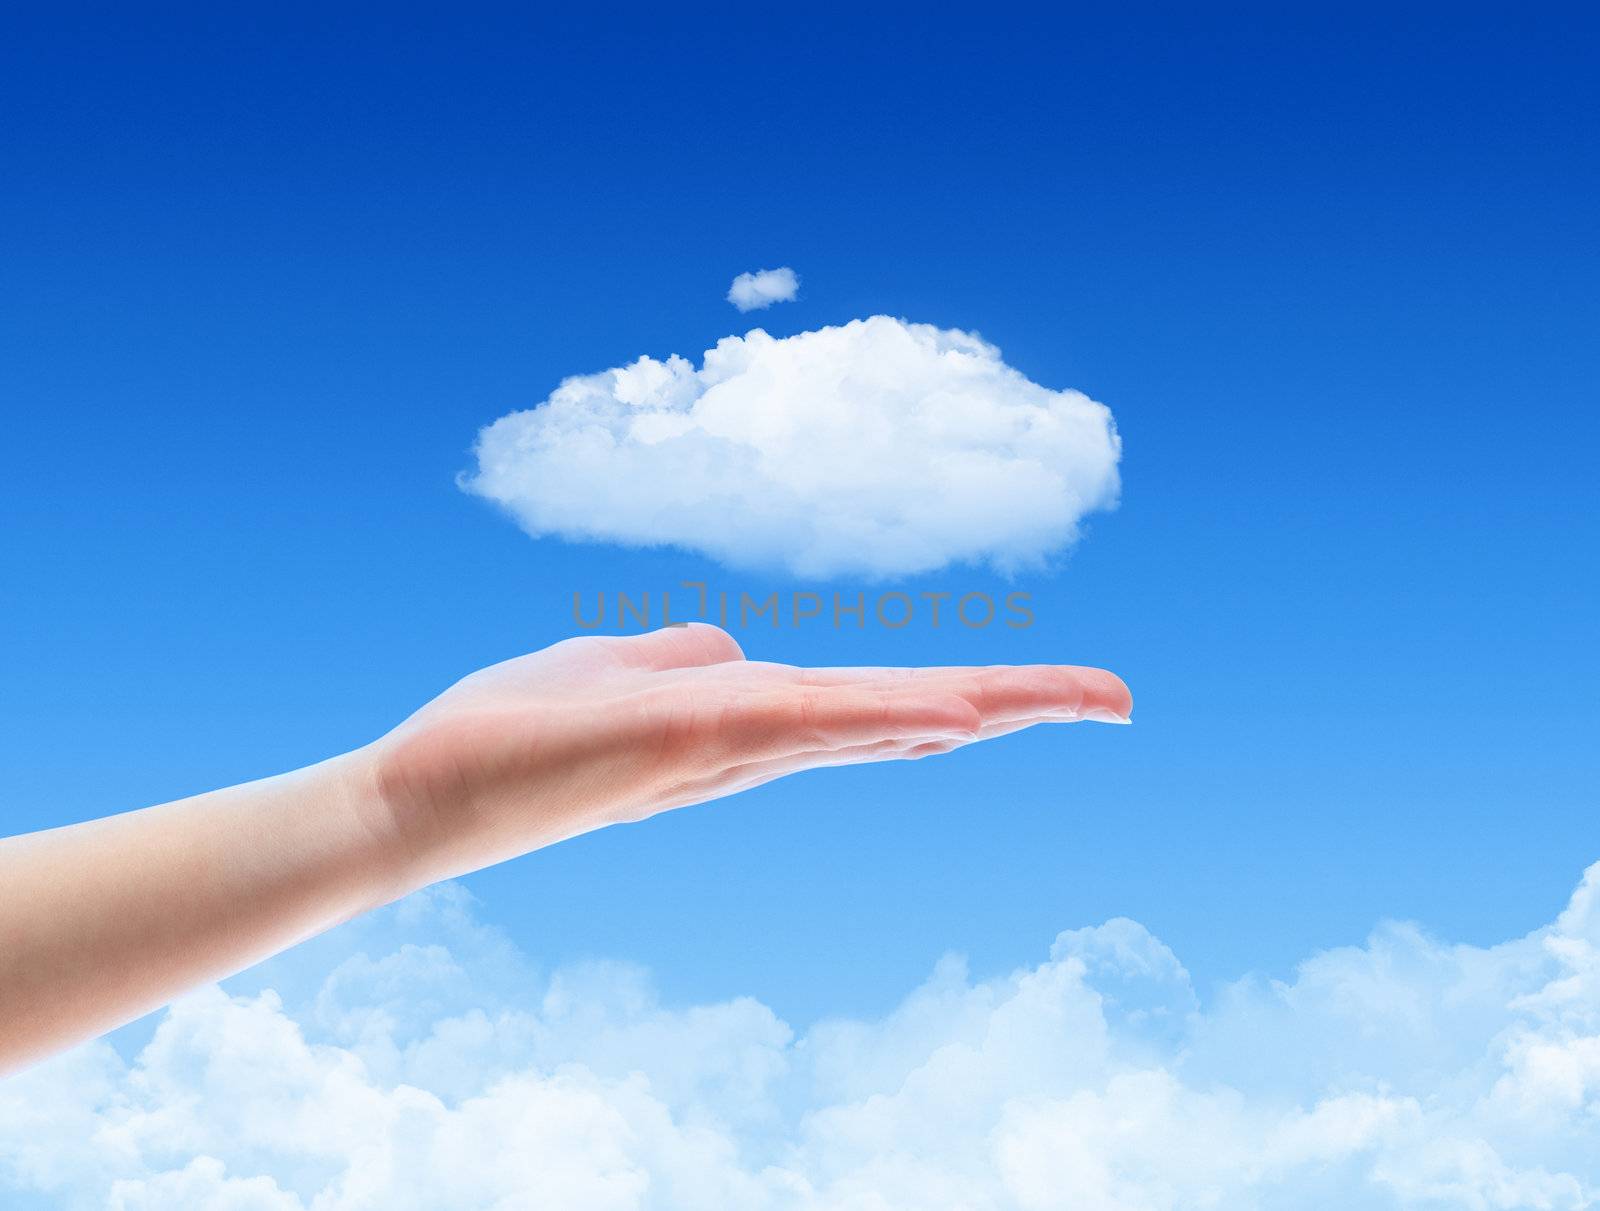 Woman hand offer the cloud against blue sky with clouds. Concept image on cloud computing and ecology theme.